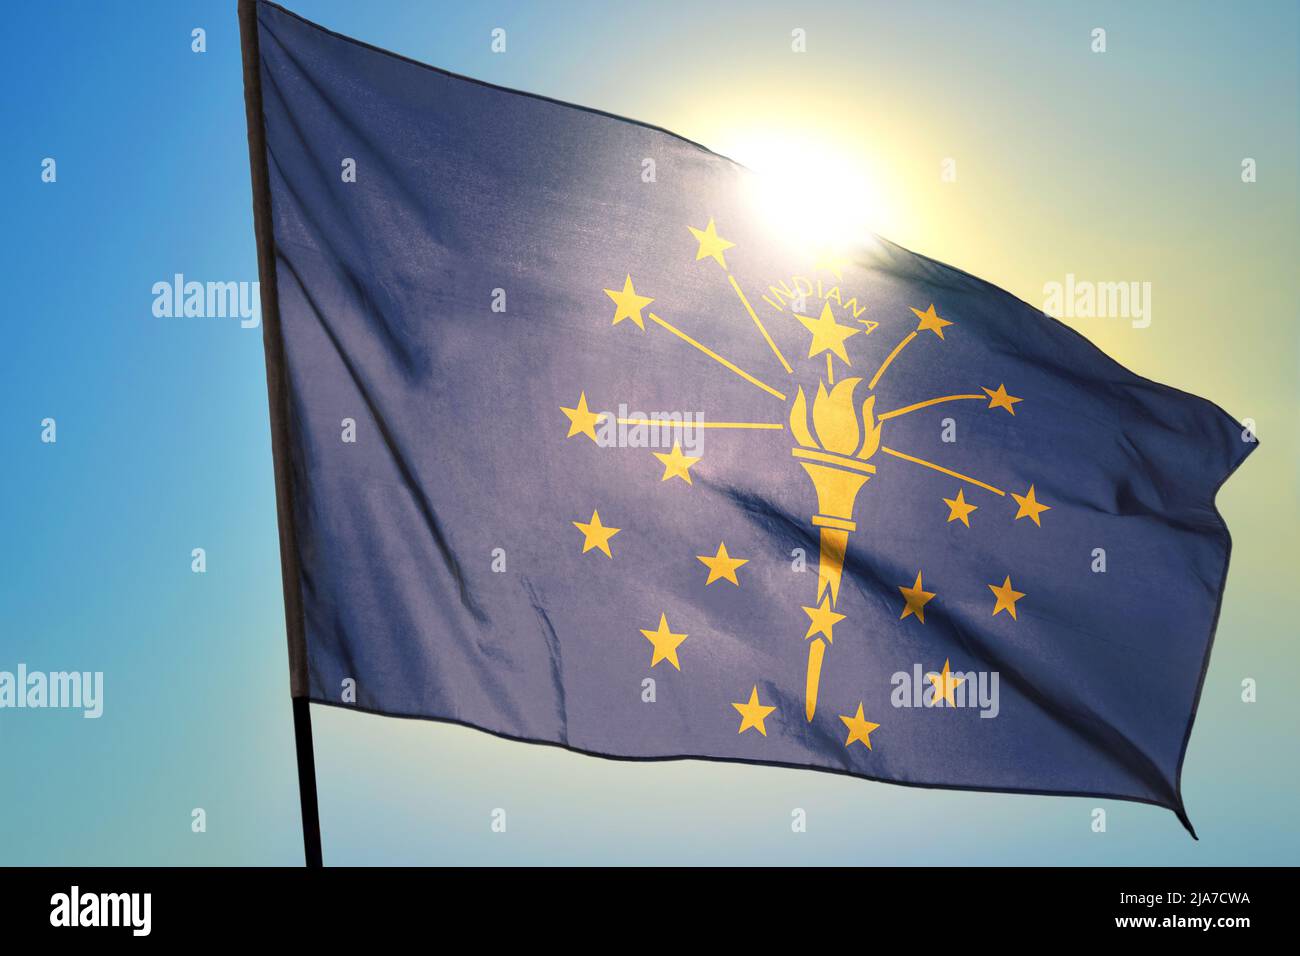 Indiana state of United States flag waving on the wind Stock Photo